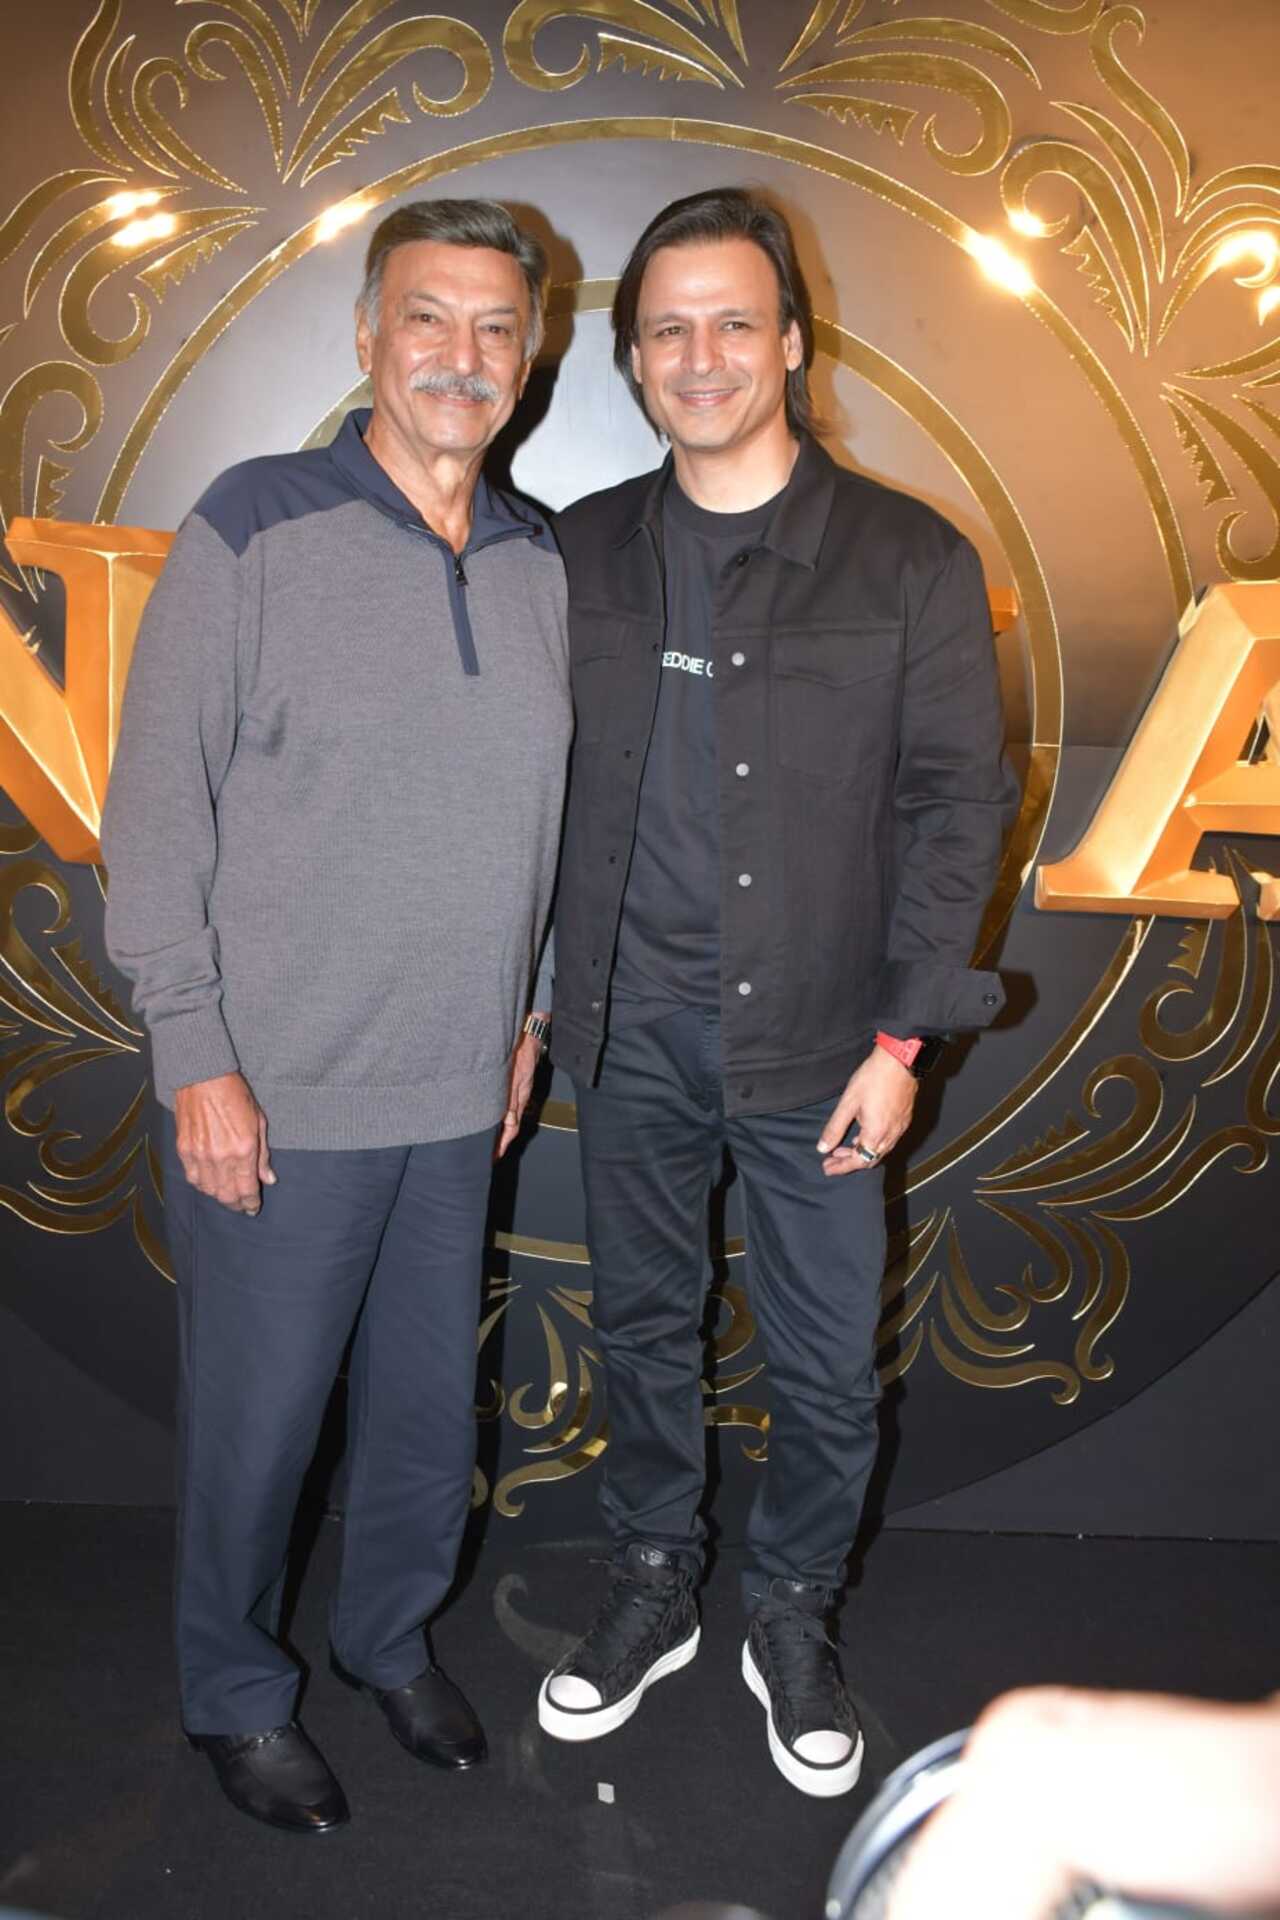 Suresh Oberoi played the role of Ranbir's grandfather in the film. He attended the success bash with his son, actor Vivek Oberoi